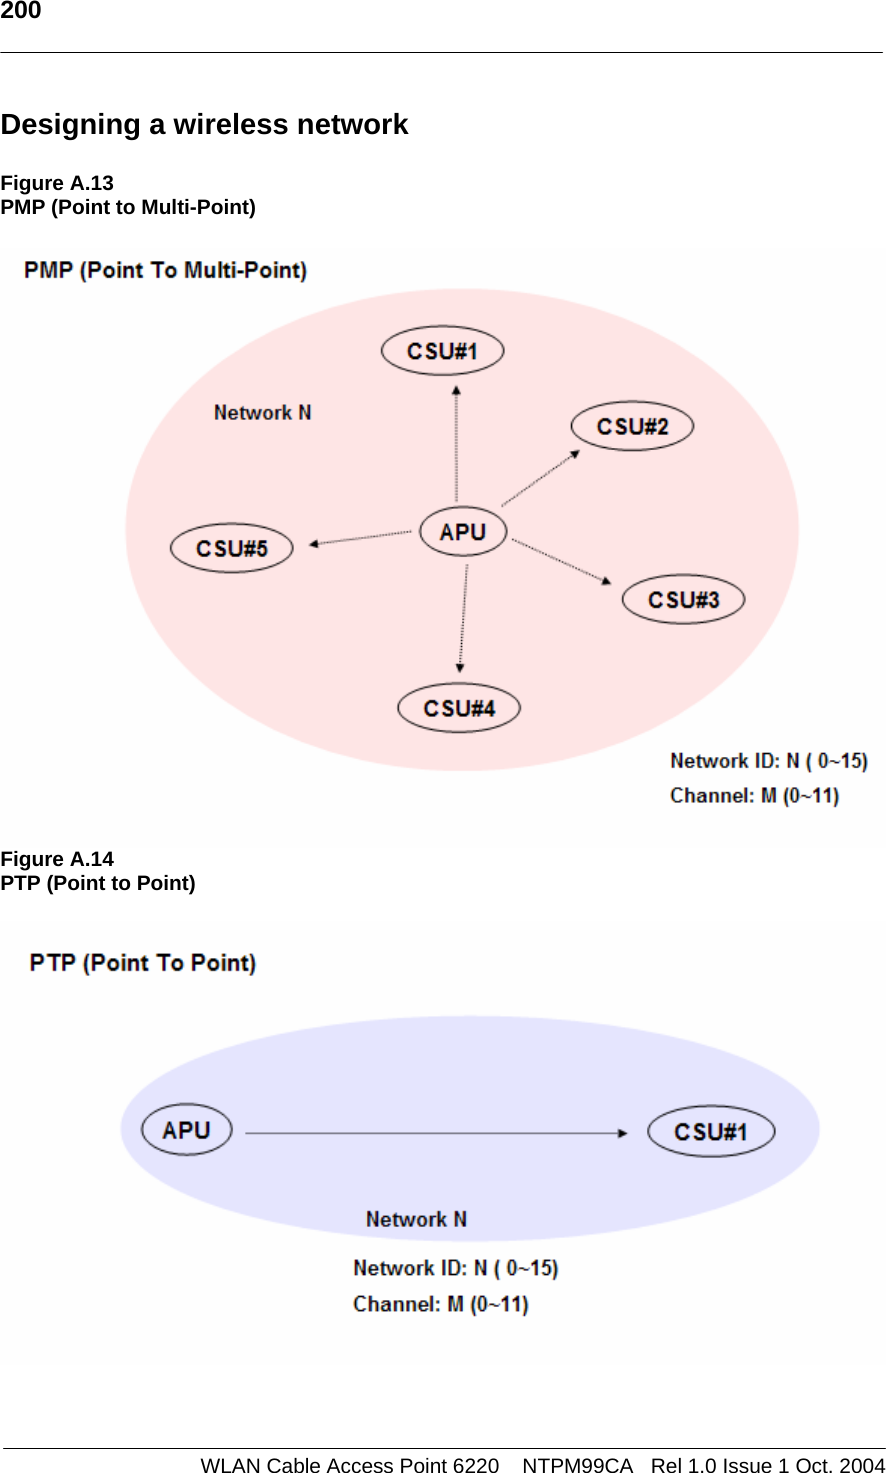   200   Designing a wireless network   Figure A.13 PMP (Point to Multi-Point)   Figure A.14 PTP (Point to Point)      WLAN Cable Access Point 6220    NTPM99CA   Rel 1.0 Issue 1 Oct. 2004